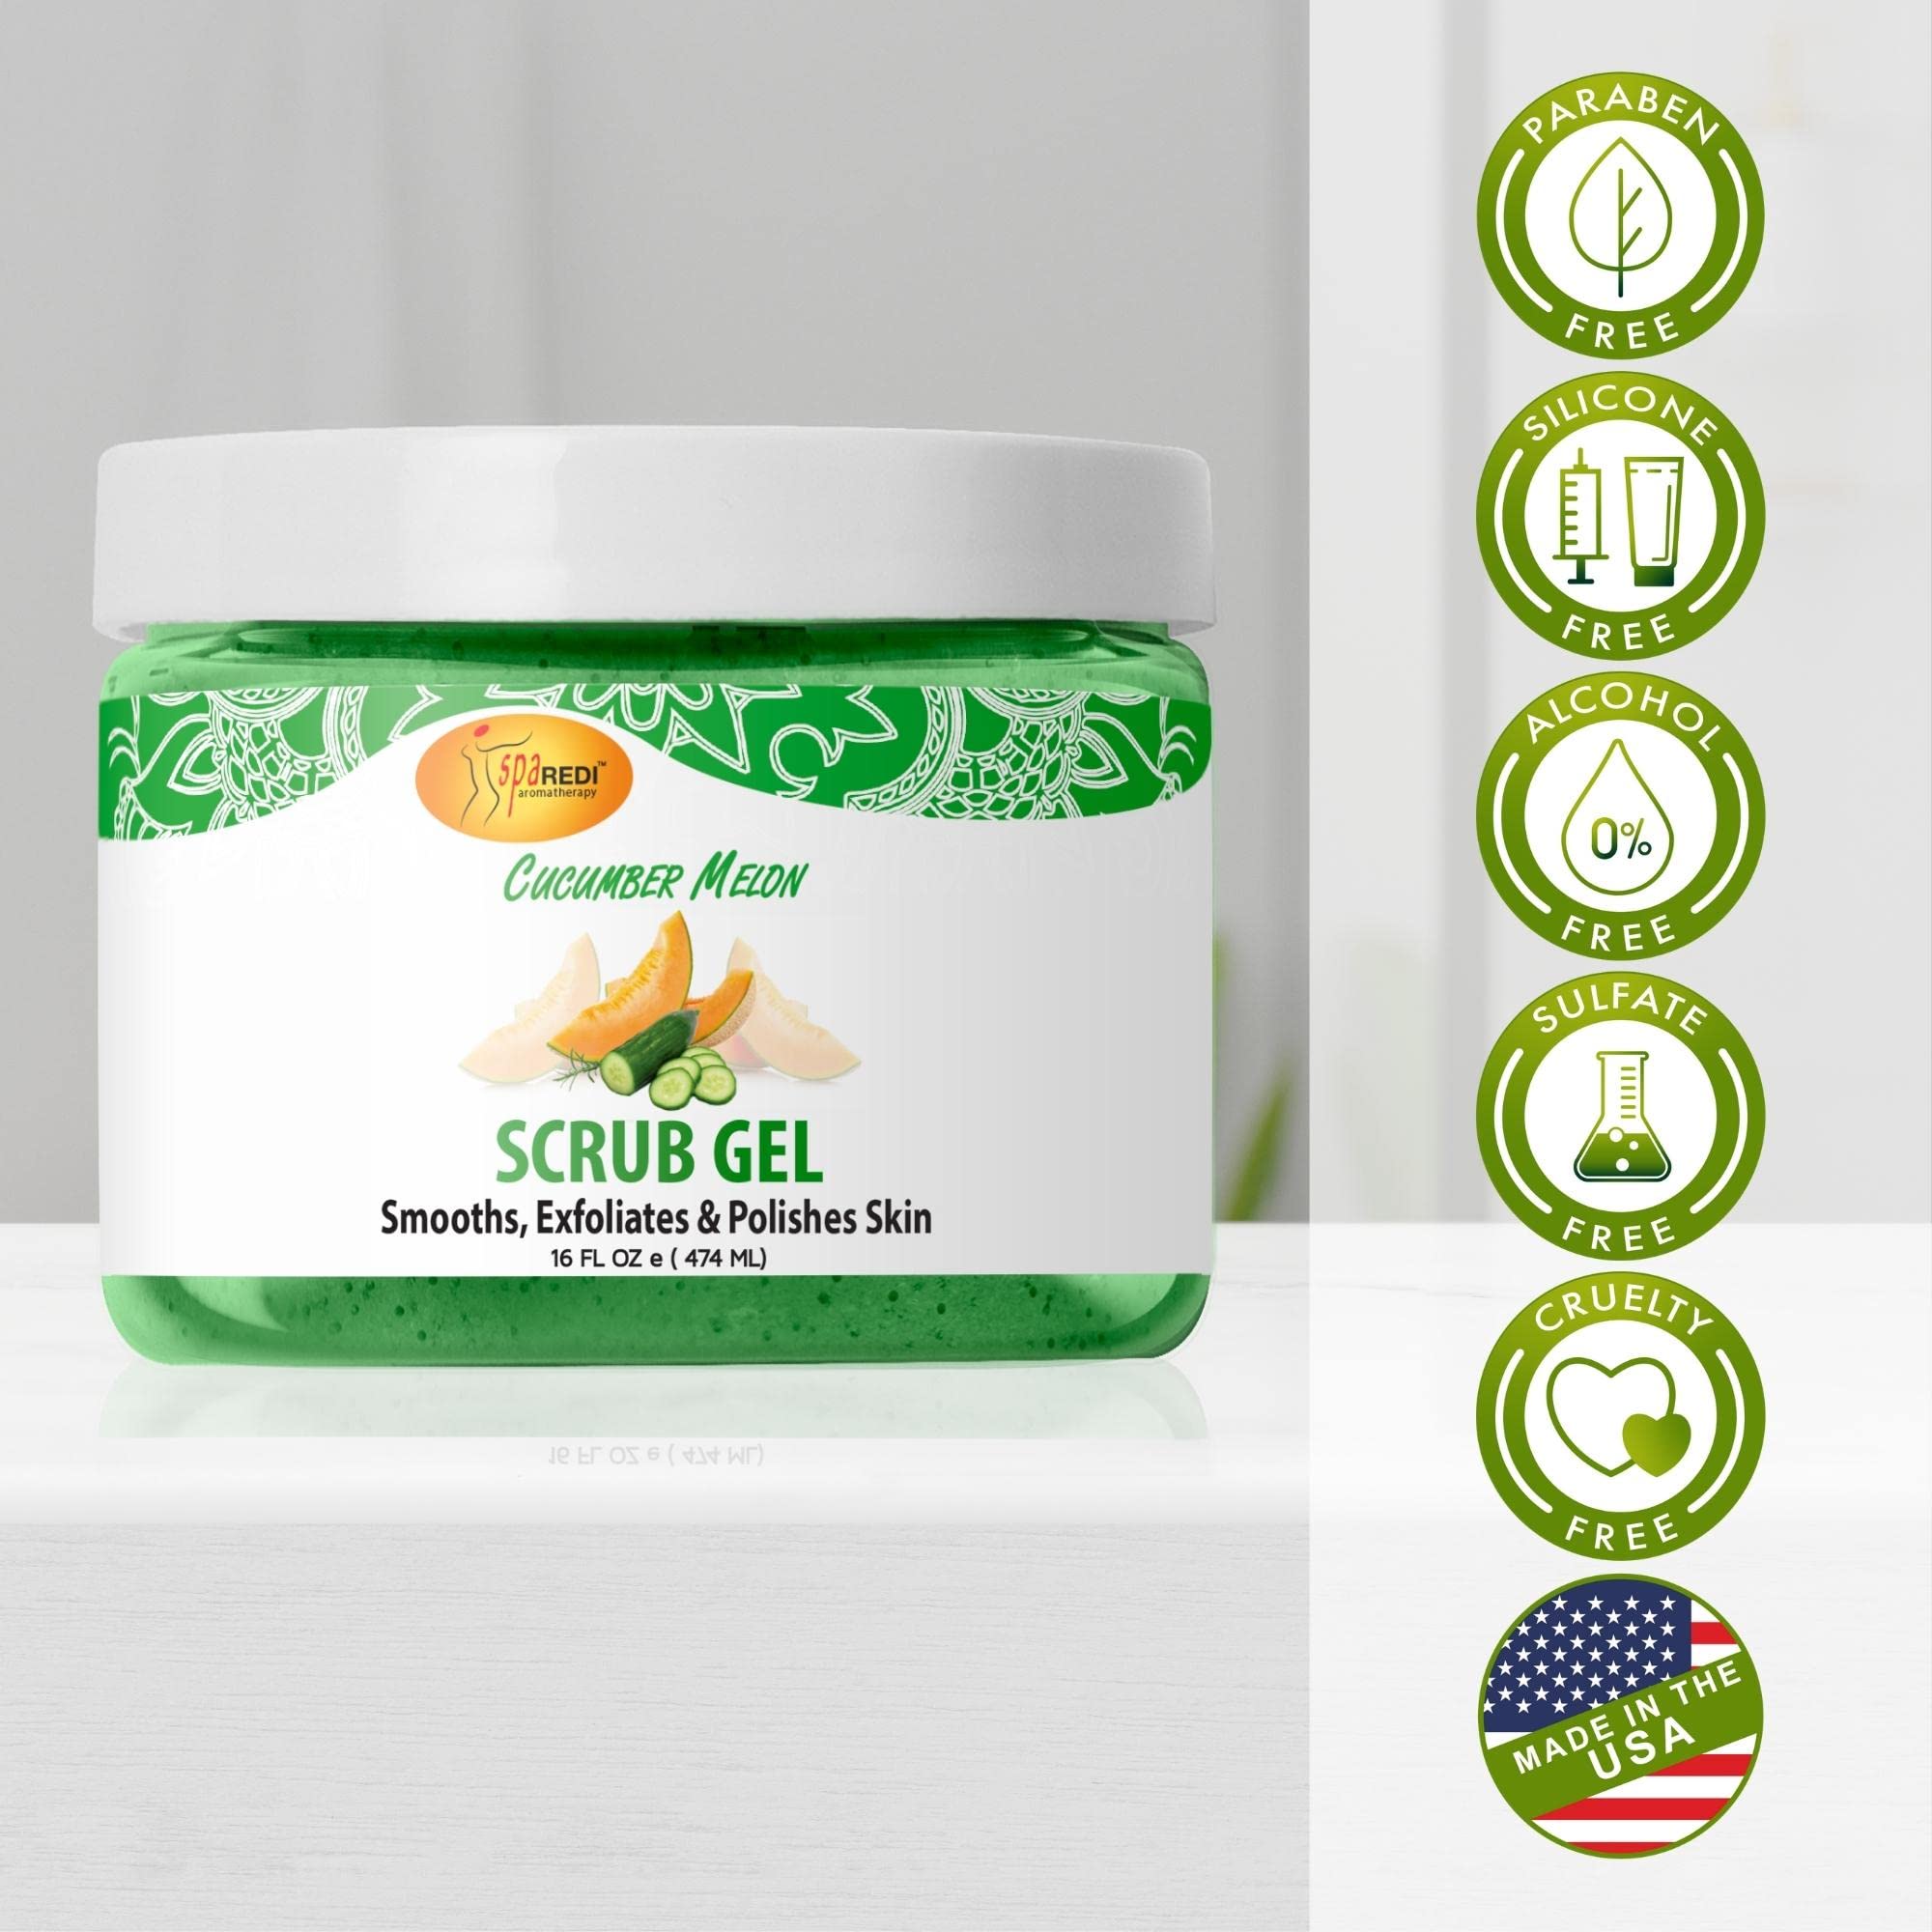 SPA REDI – Exfoliating Scrub Pumice Gel, Cucumber Melon, 16 oz - Manicure, Pedicure and Body Exfoliator Infused with Hyaluronic Acid, Amino Acids, Panthenol and Comfrey Extract